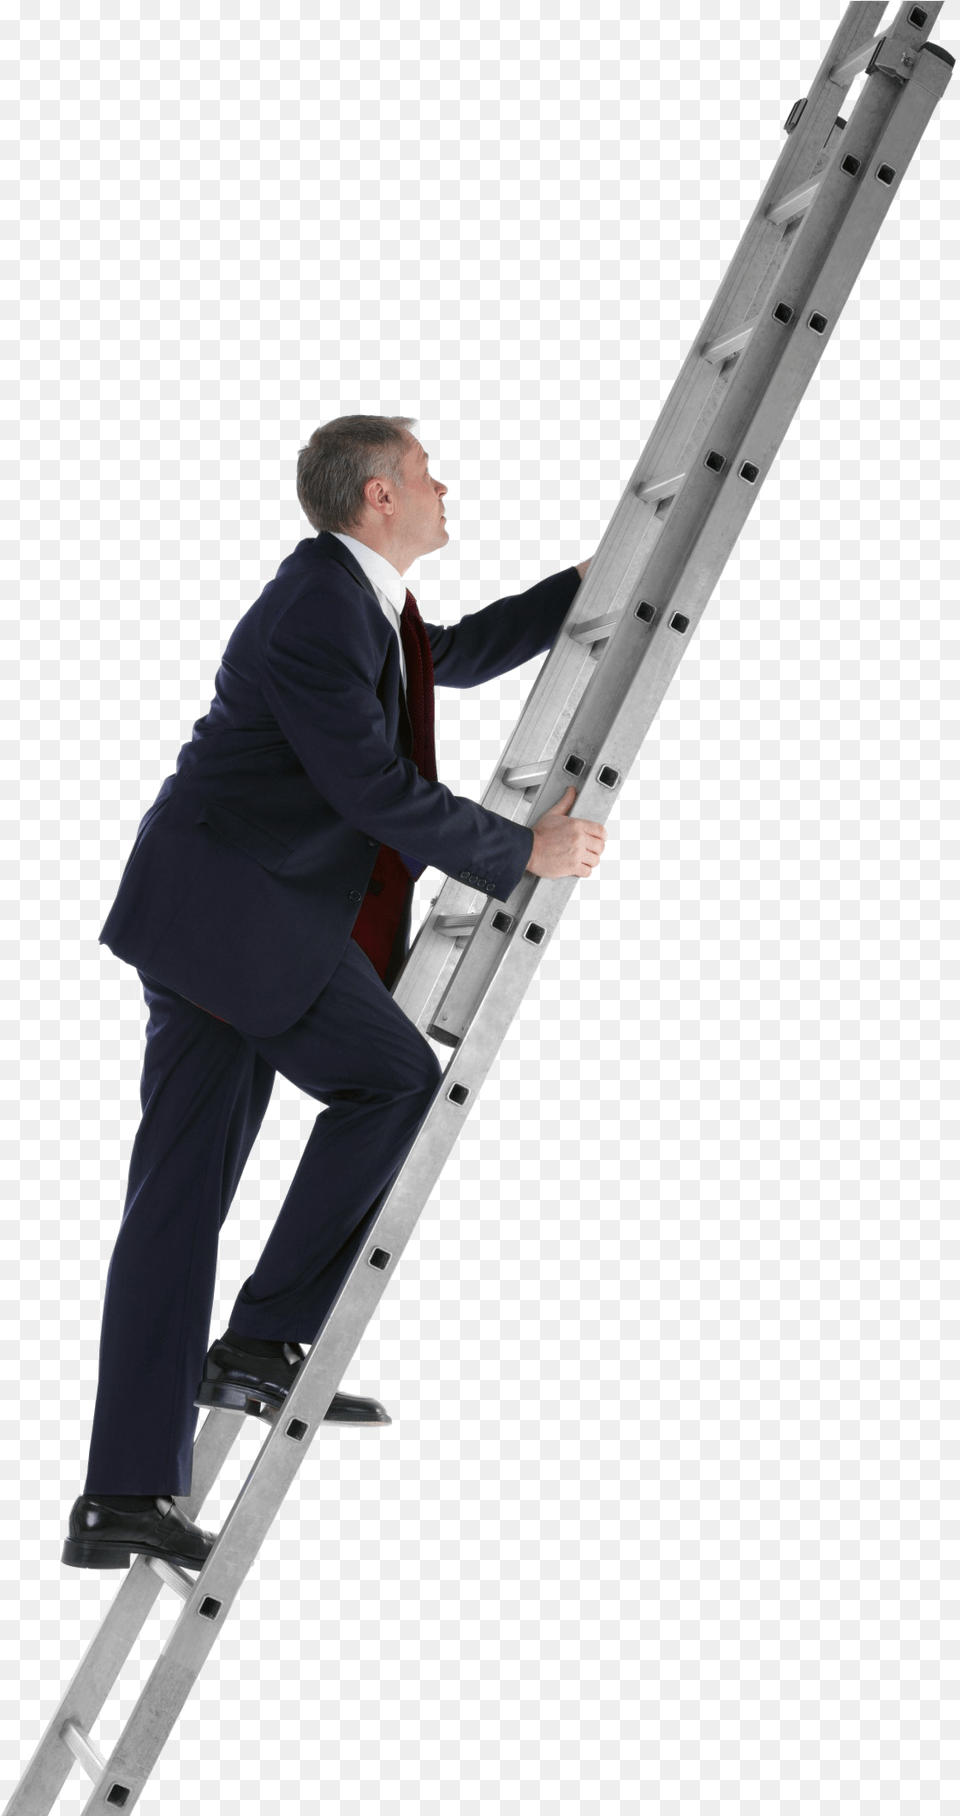 Ladder Of Success Climbing A Ladder, Clothing, Formal Wear, Suit, Adult Png